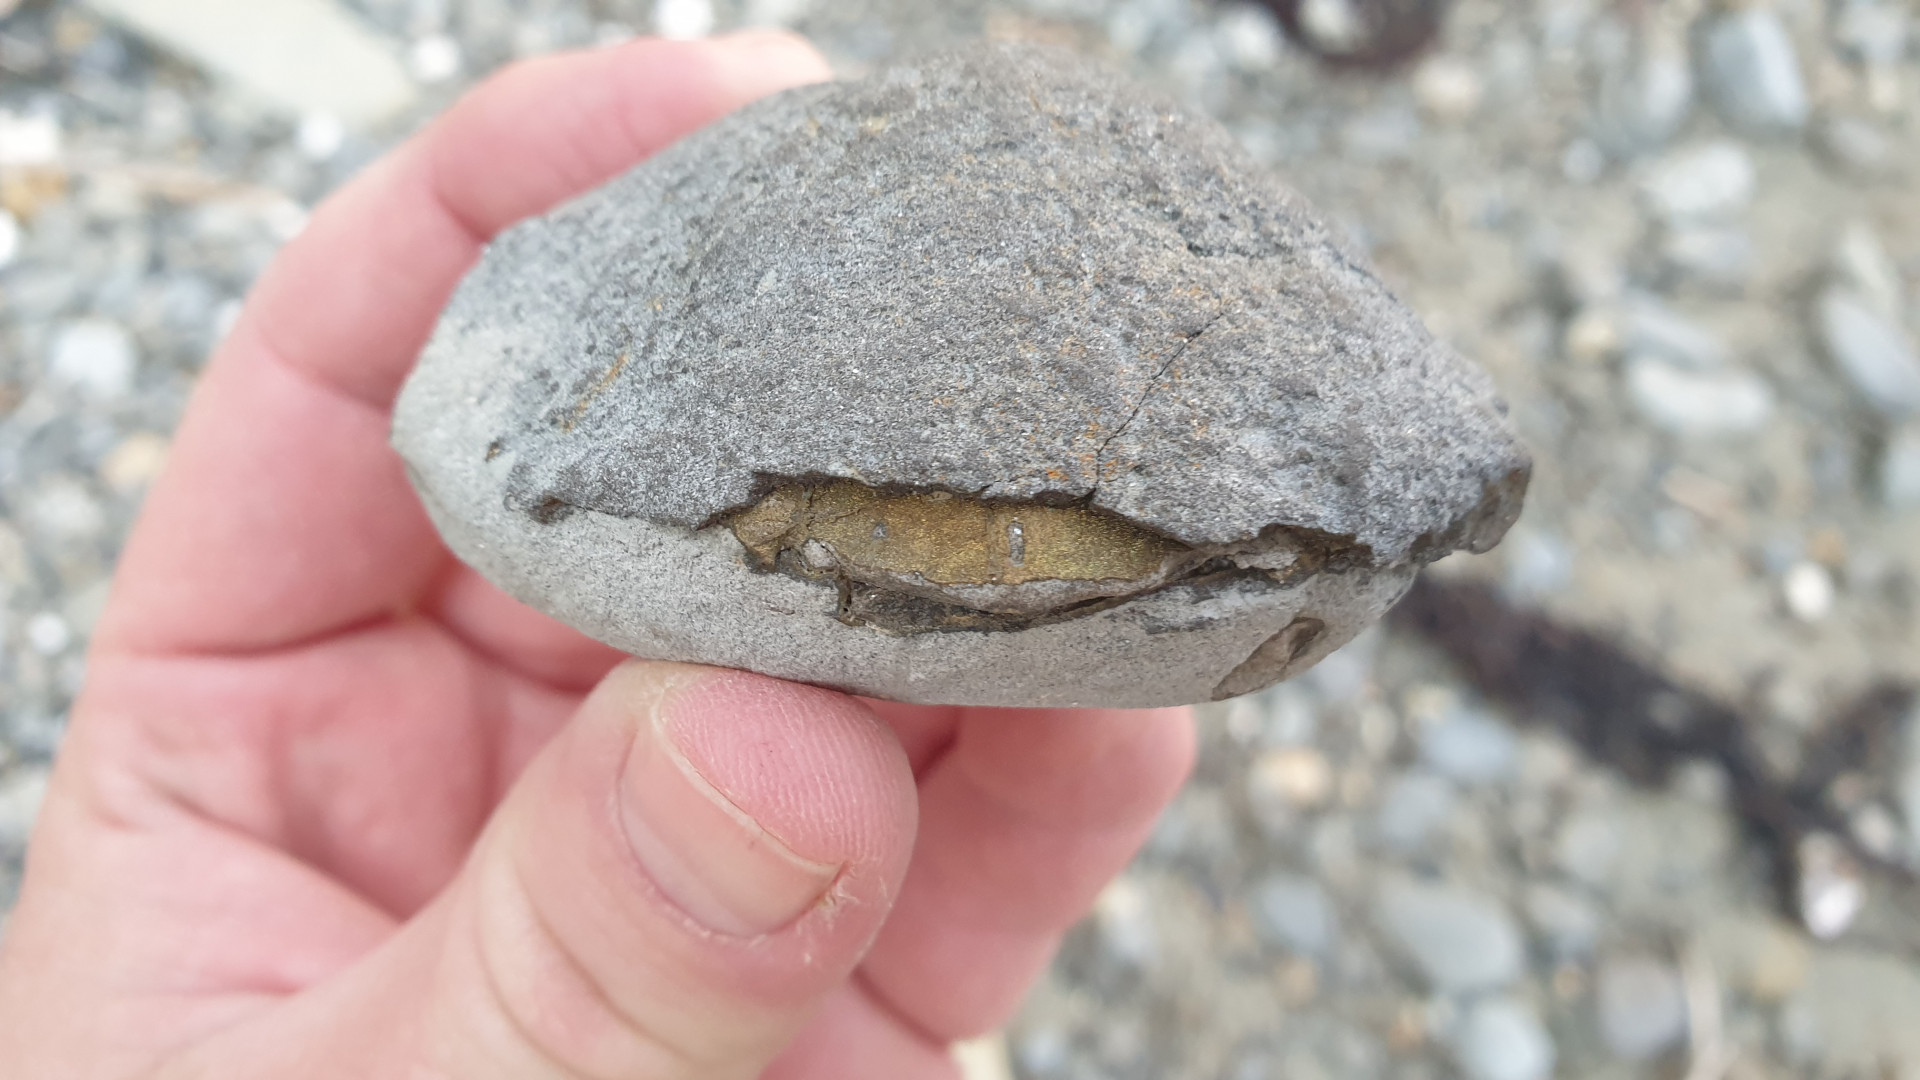 Pyritized fossil crab